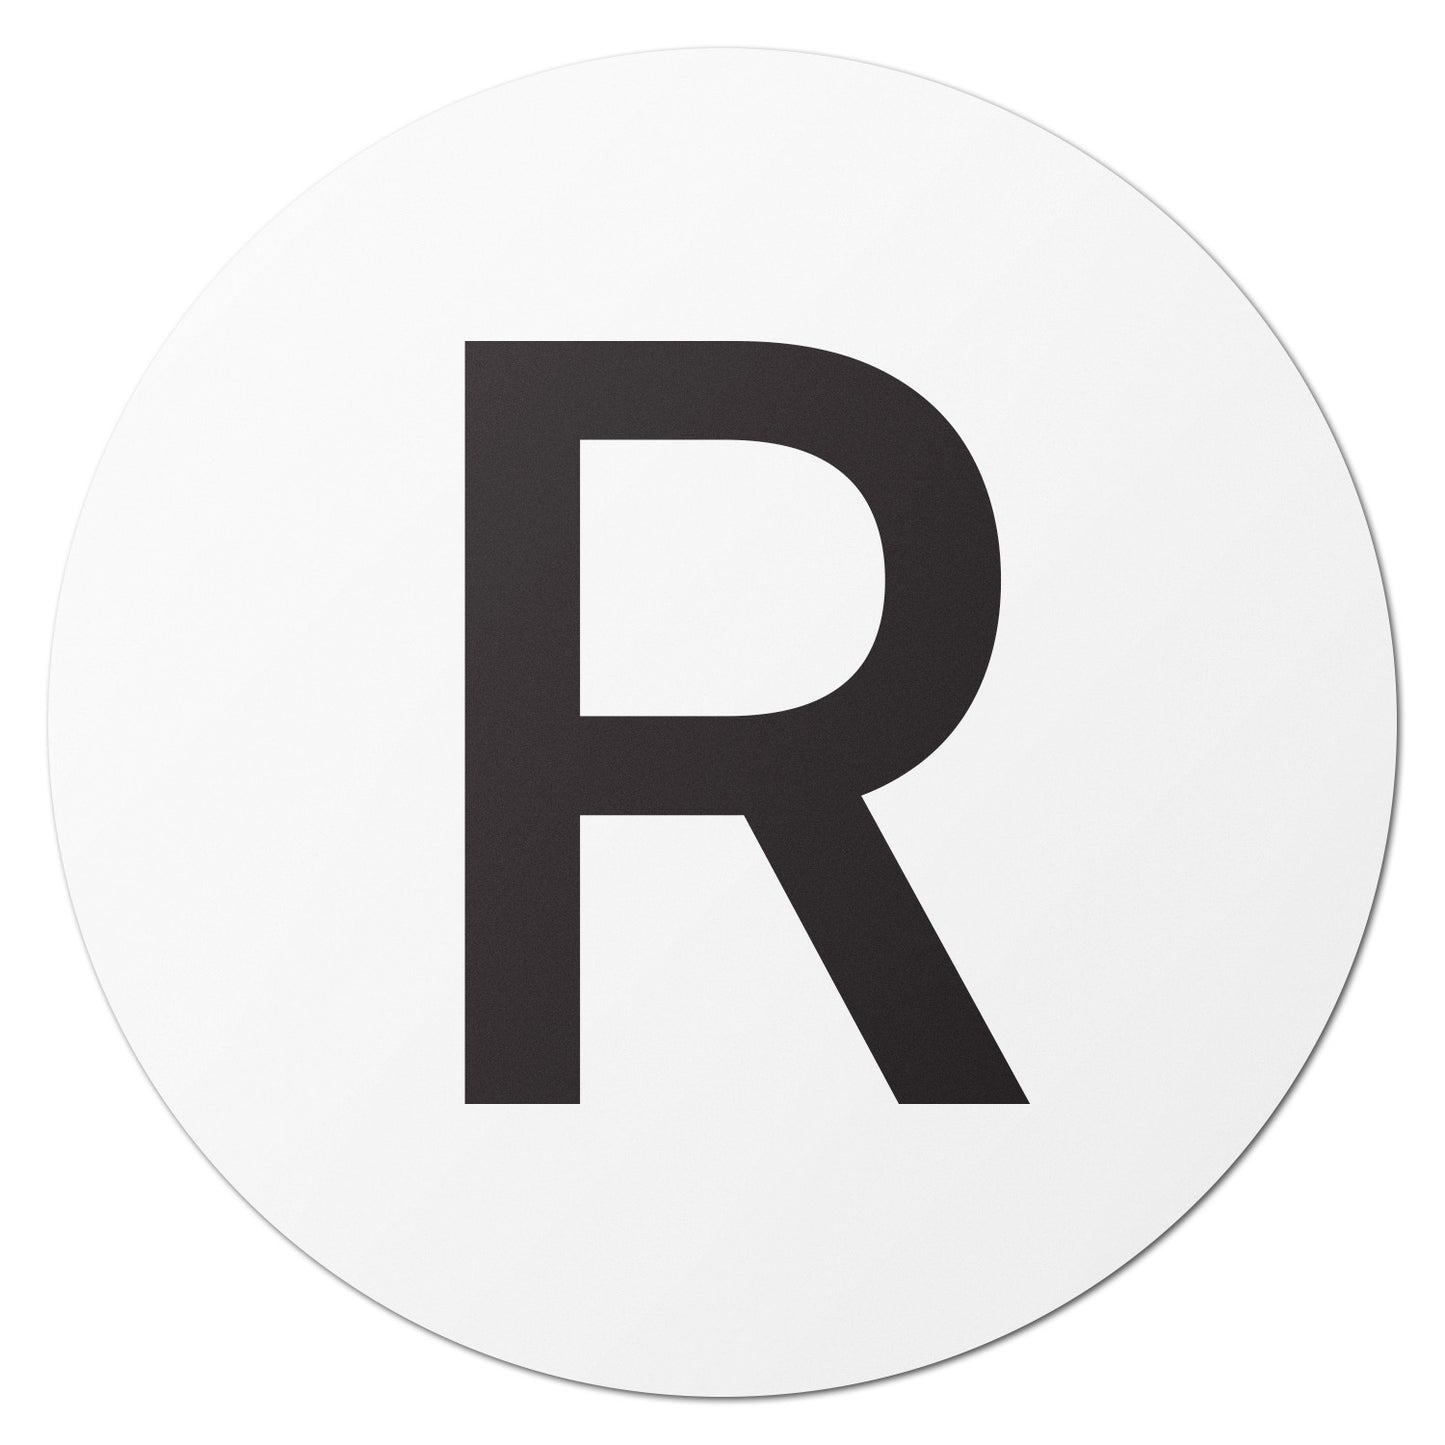 1.5 inch | Inventory: Capital Letter R Labels